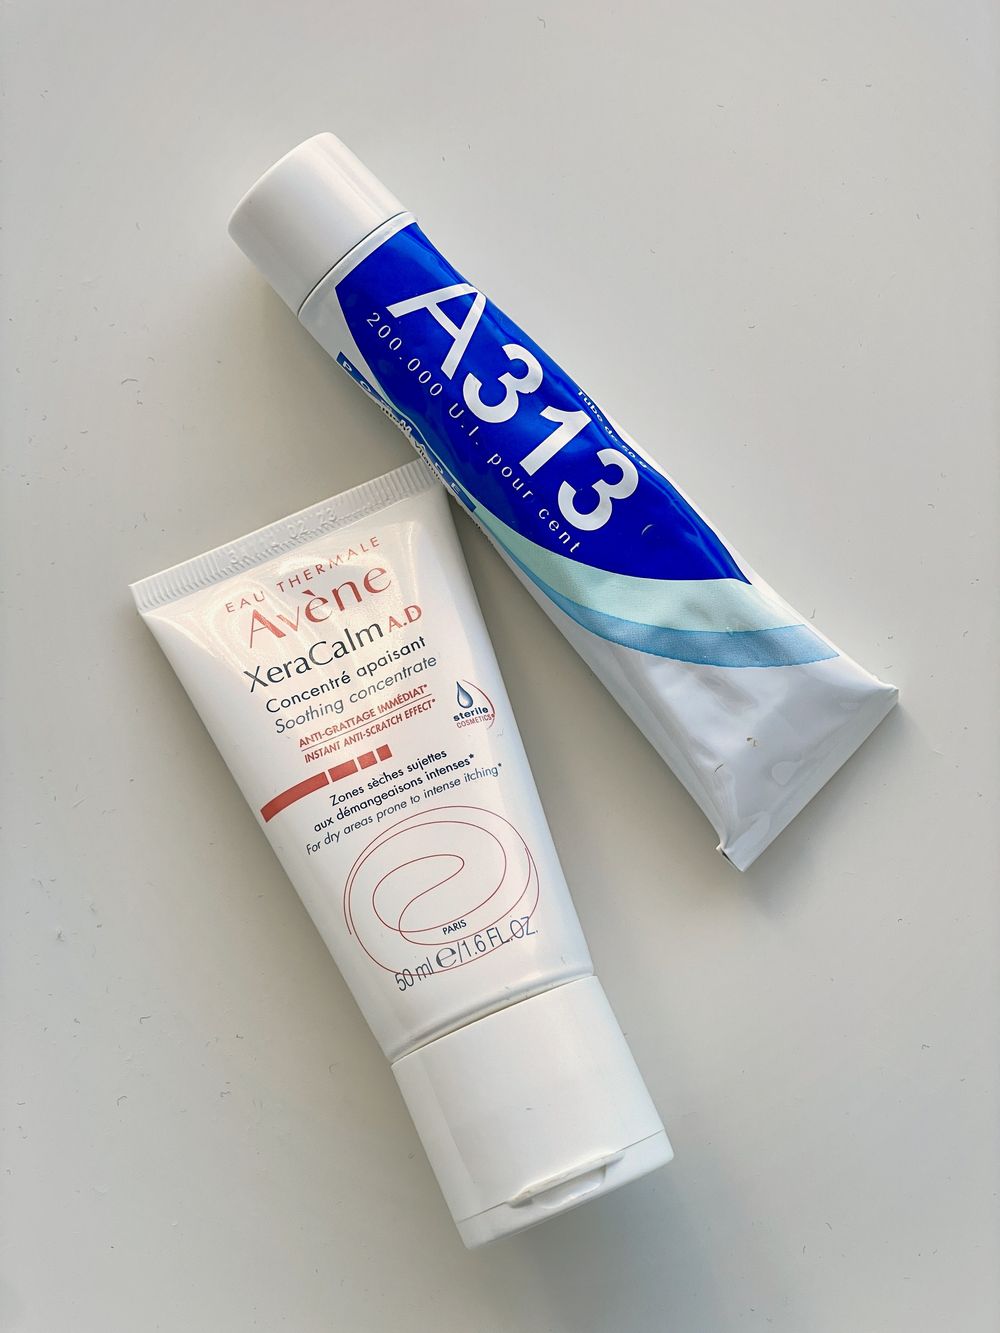 A313 review stop itchy xeracalm cream